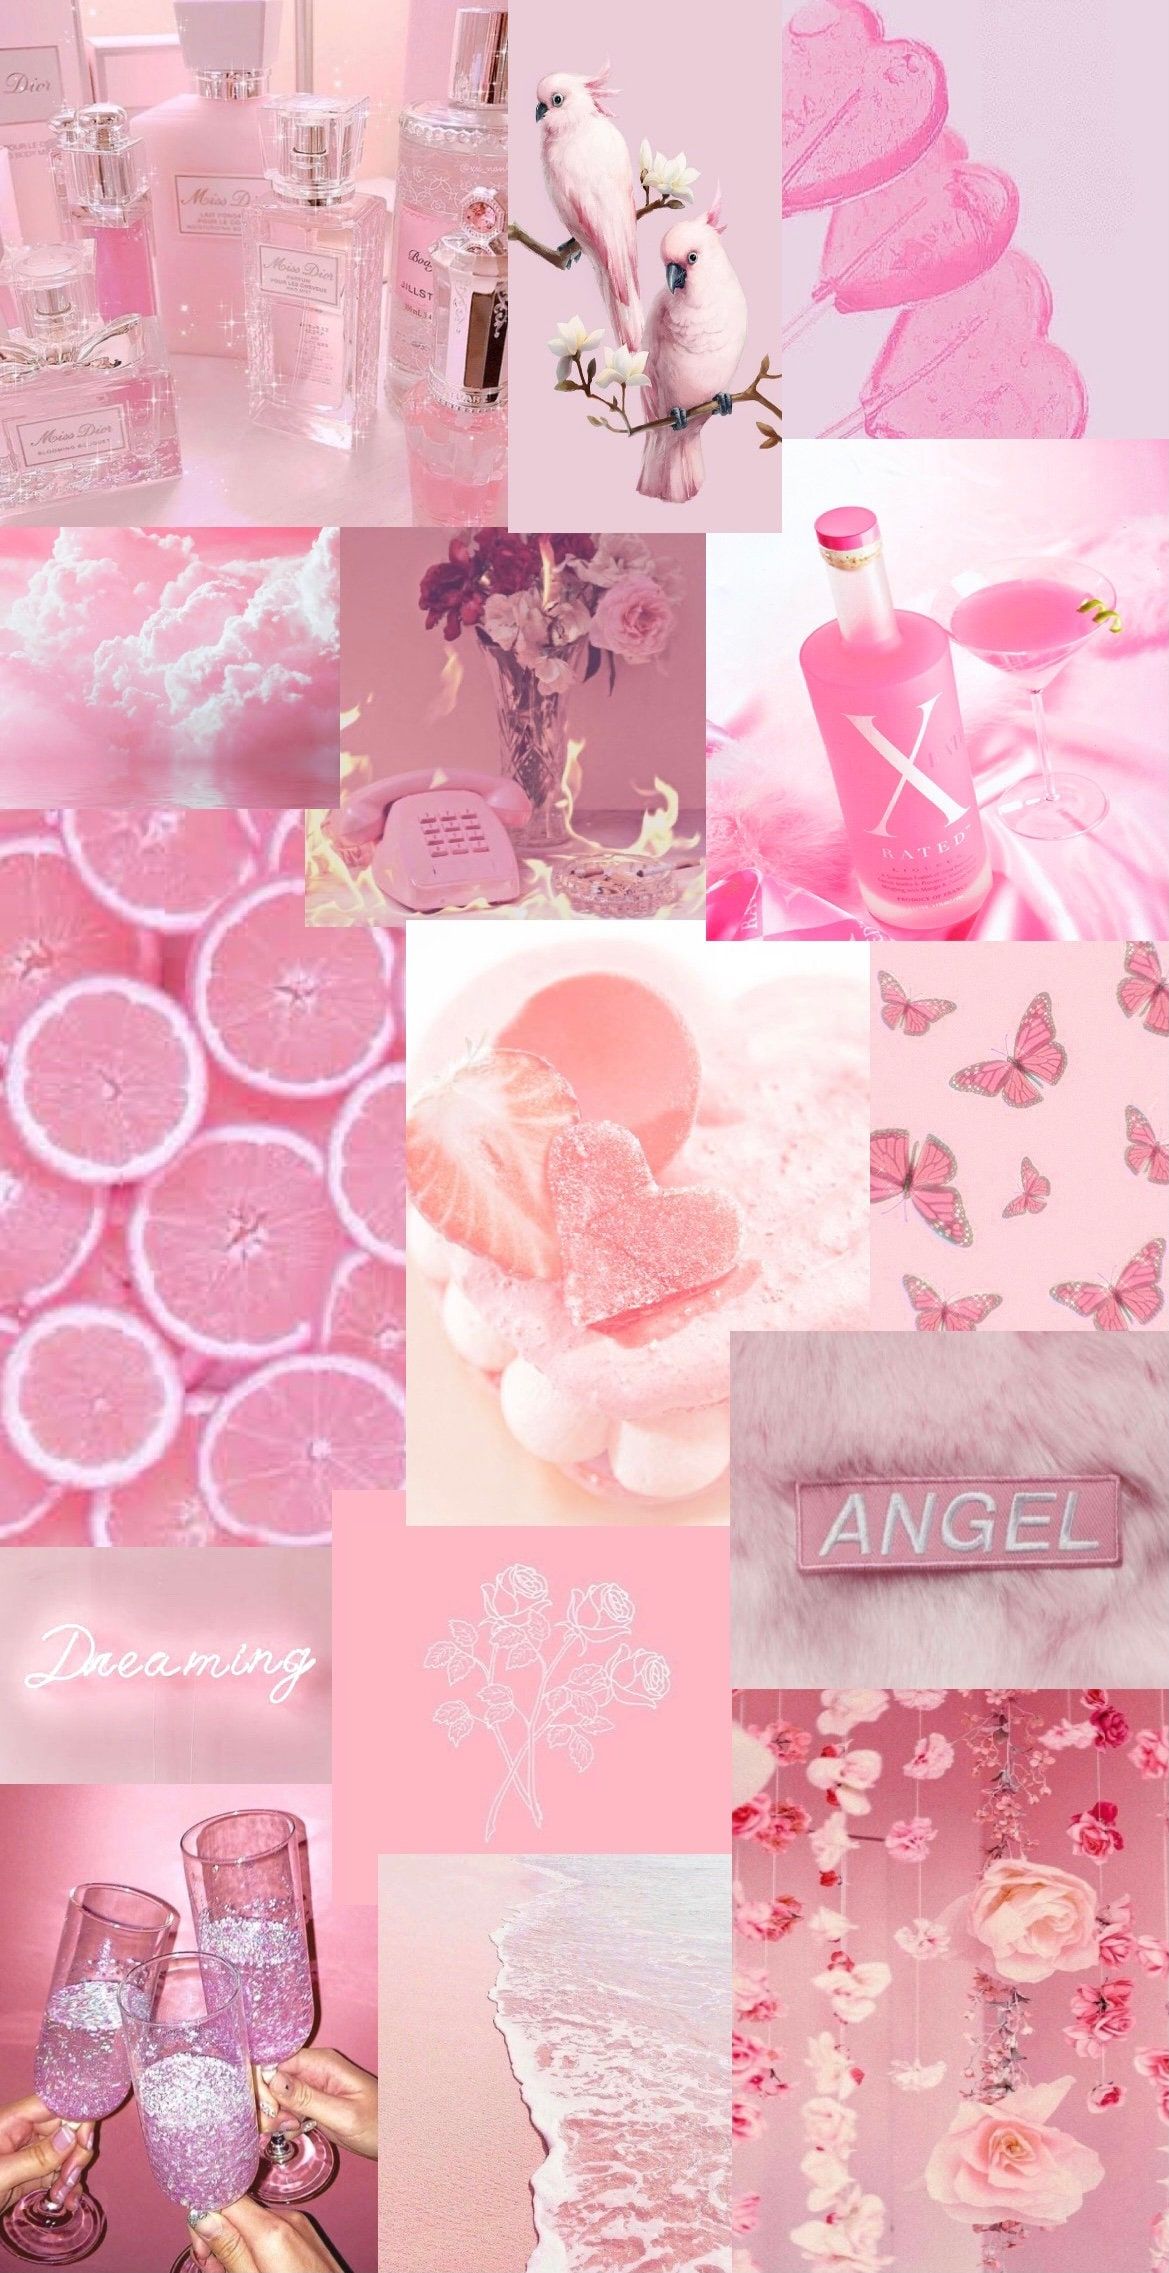 A collage of pictures with pink backgrounds - Pink, pastel pink, pink phone, Dior, soft pink, cute pink, light pink, hot pink